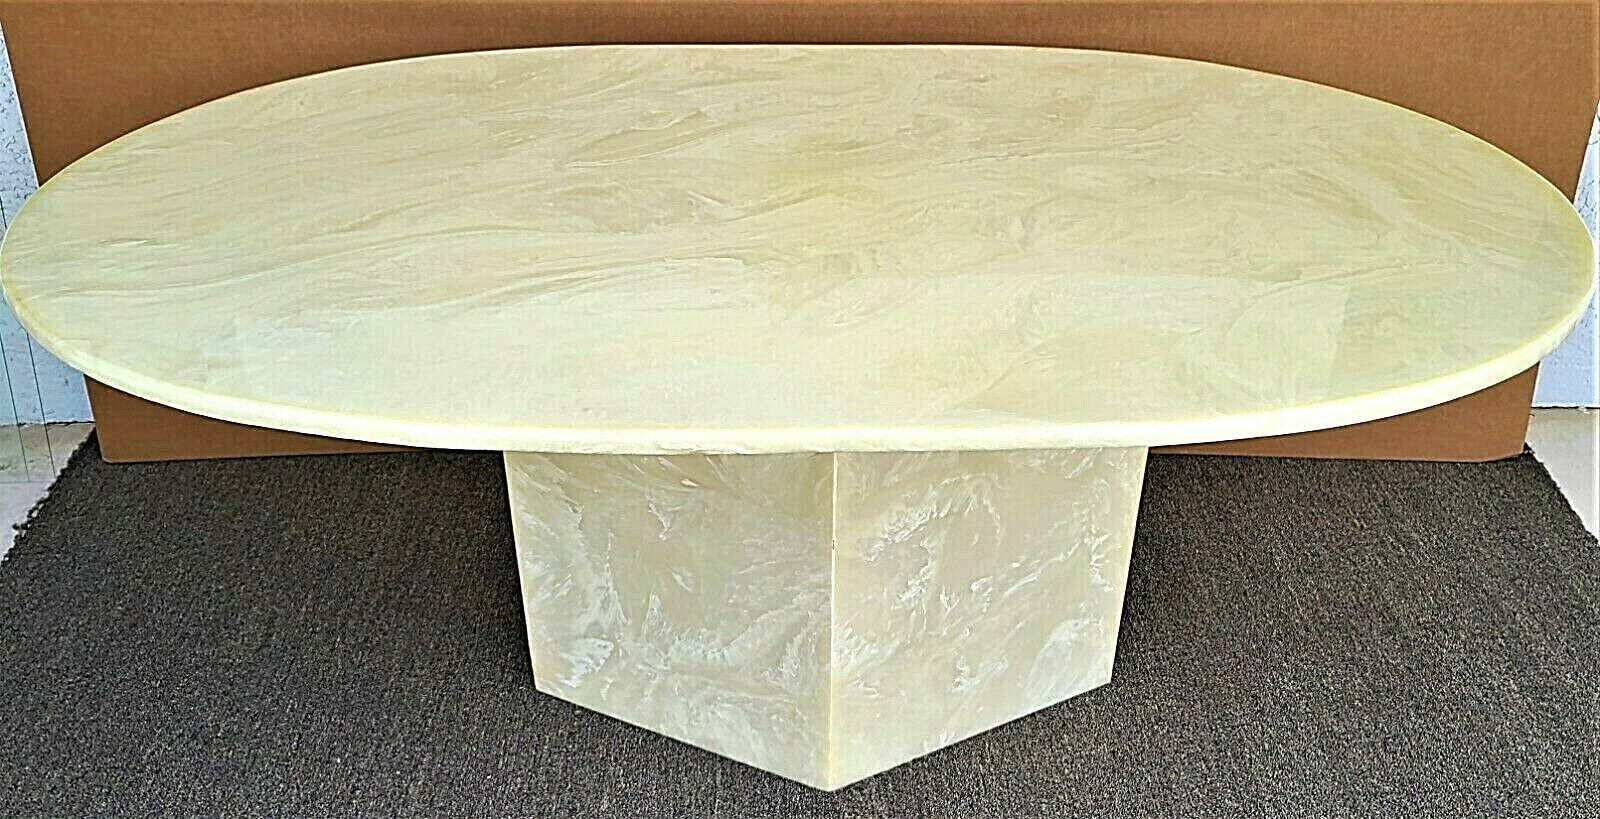 Offering One Of Our Recent Palm Beach Estate Fine Furniture Acquisitions Of A 
Vintage Mid Century Modern Solid Resin Faux Marble Oval Pedestal Dining Table

Approximate Measurements in Inches
Top with base:
30